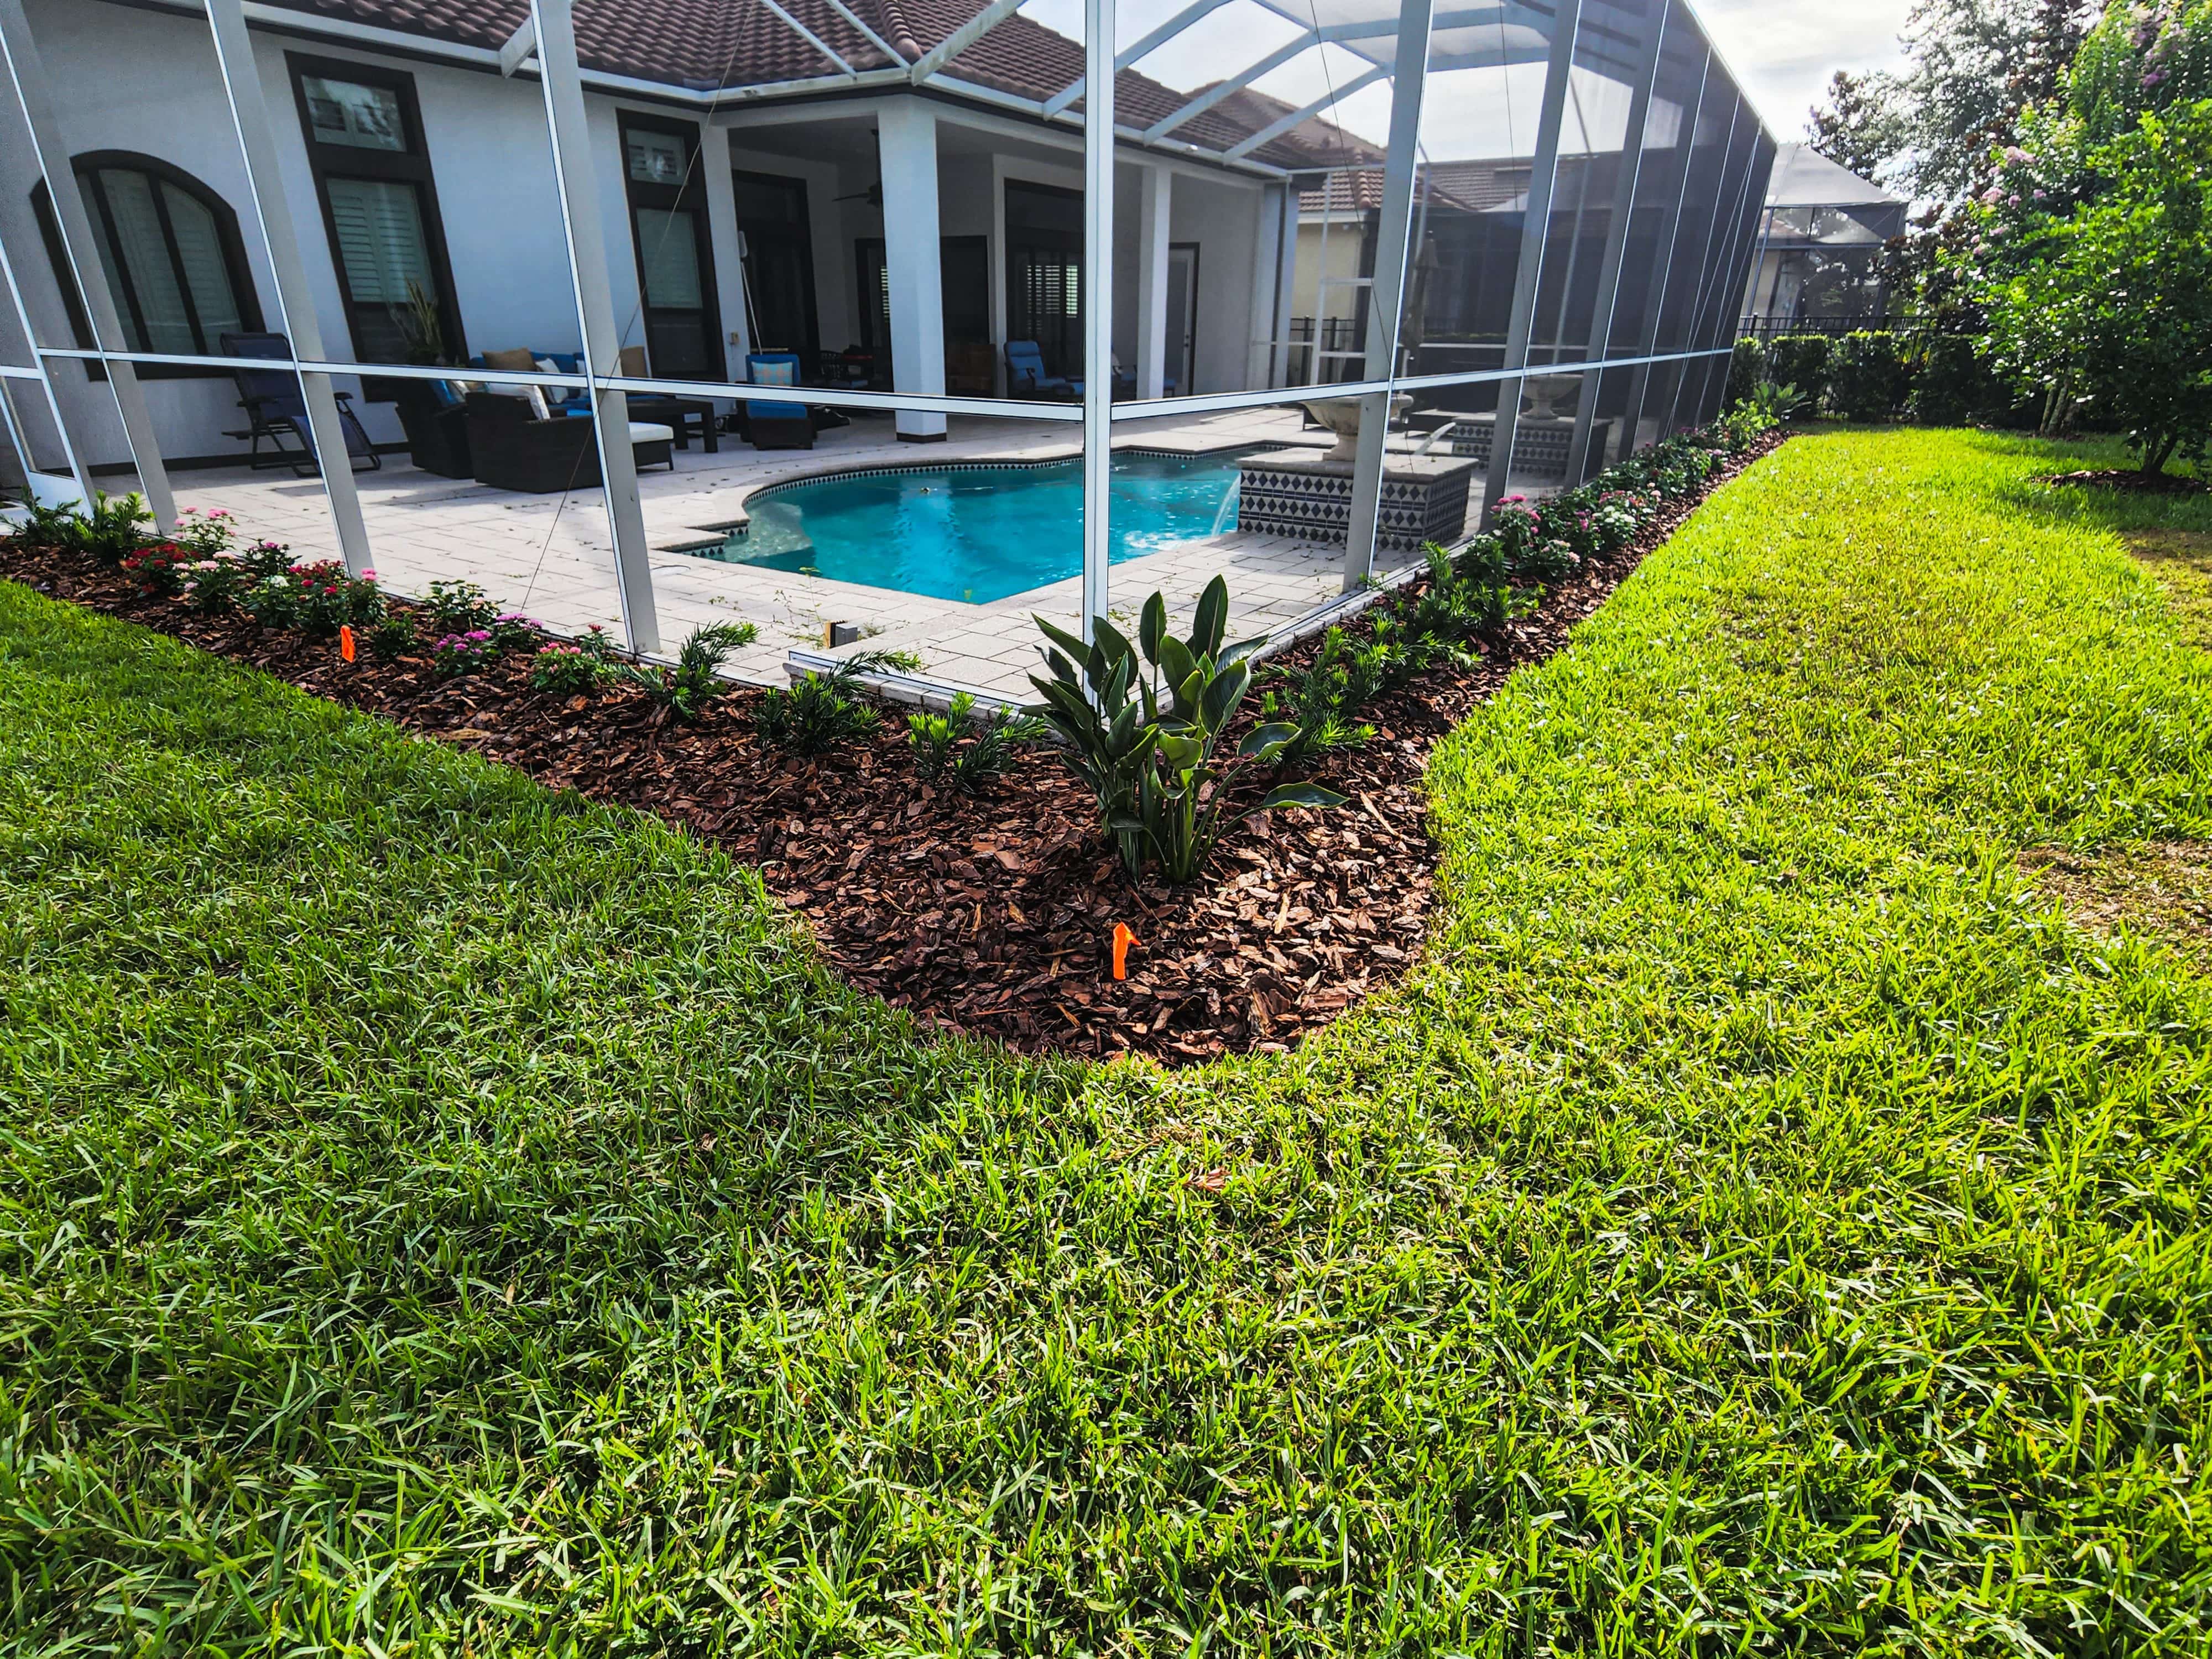 landscaping around pool with garden beds, sod and hedges